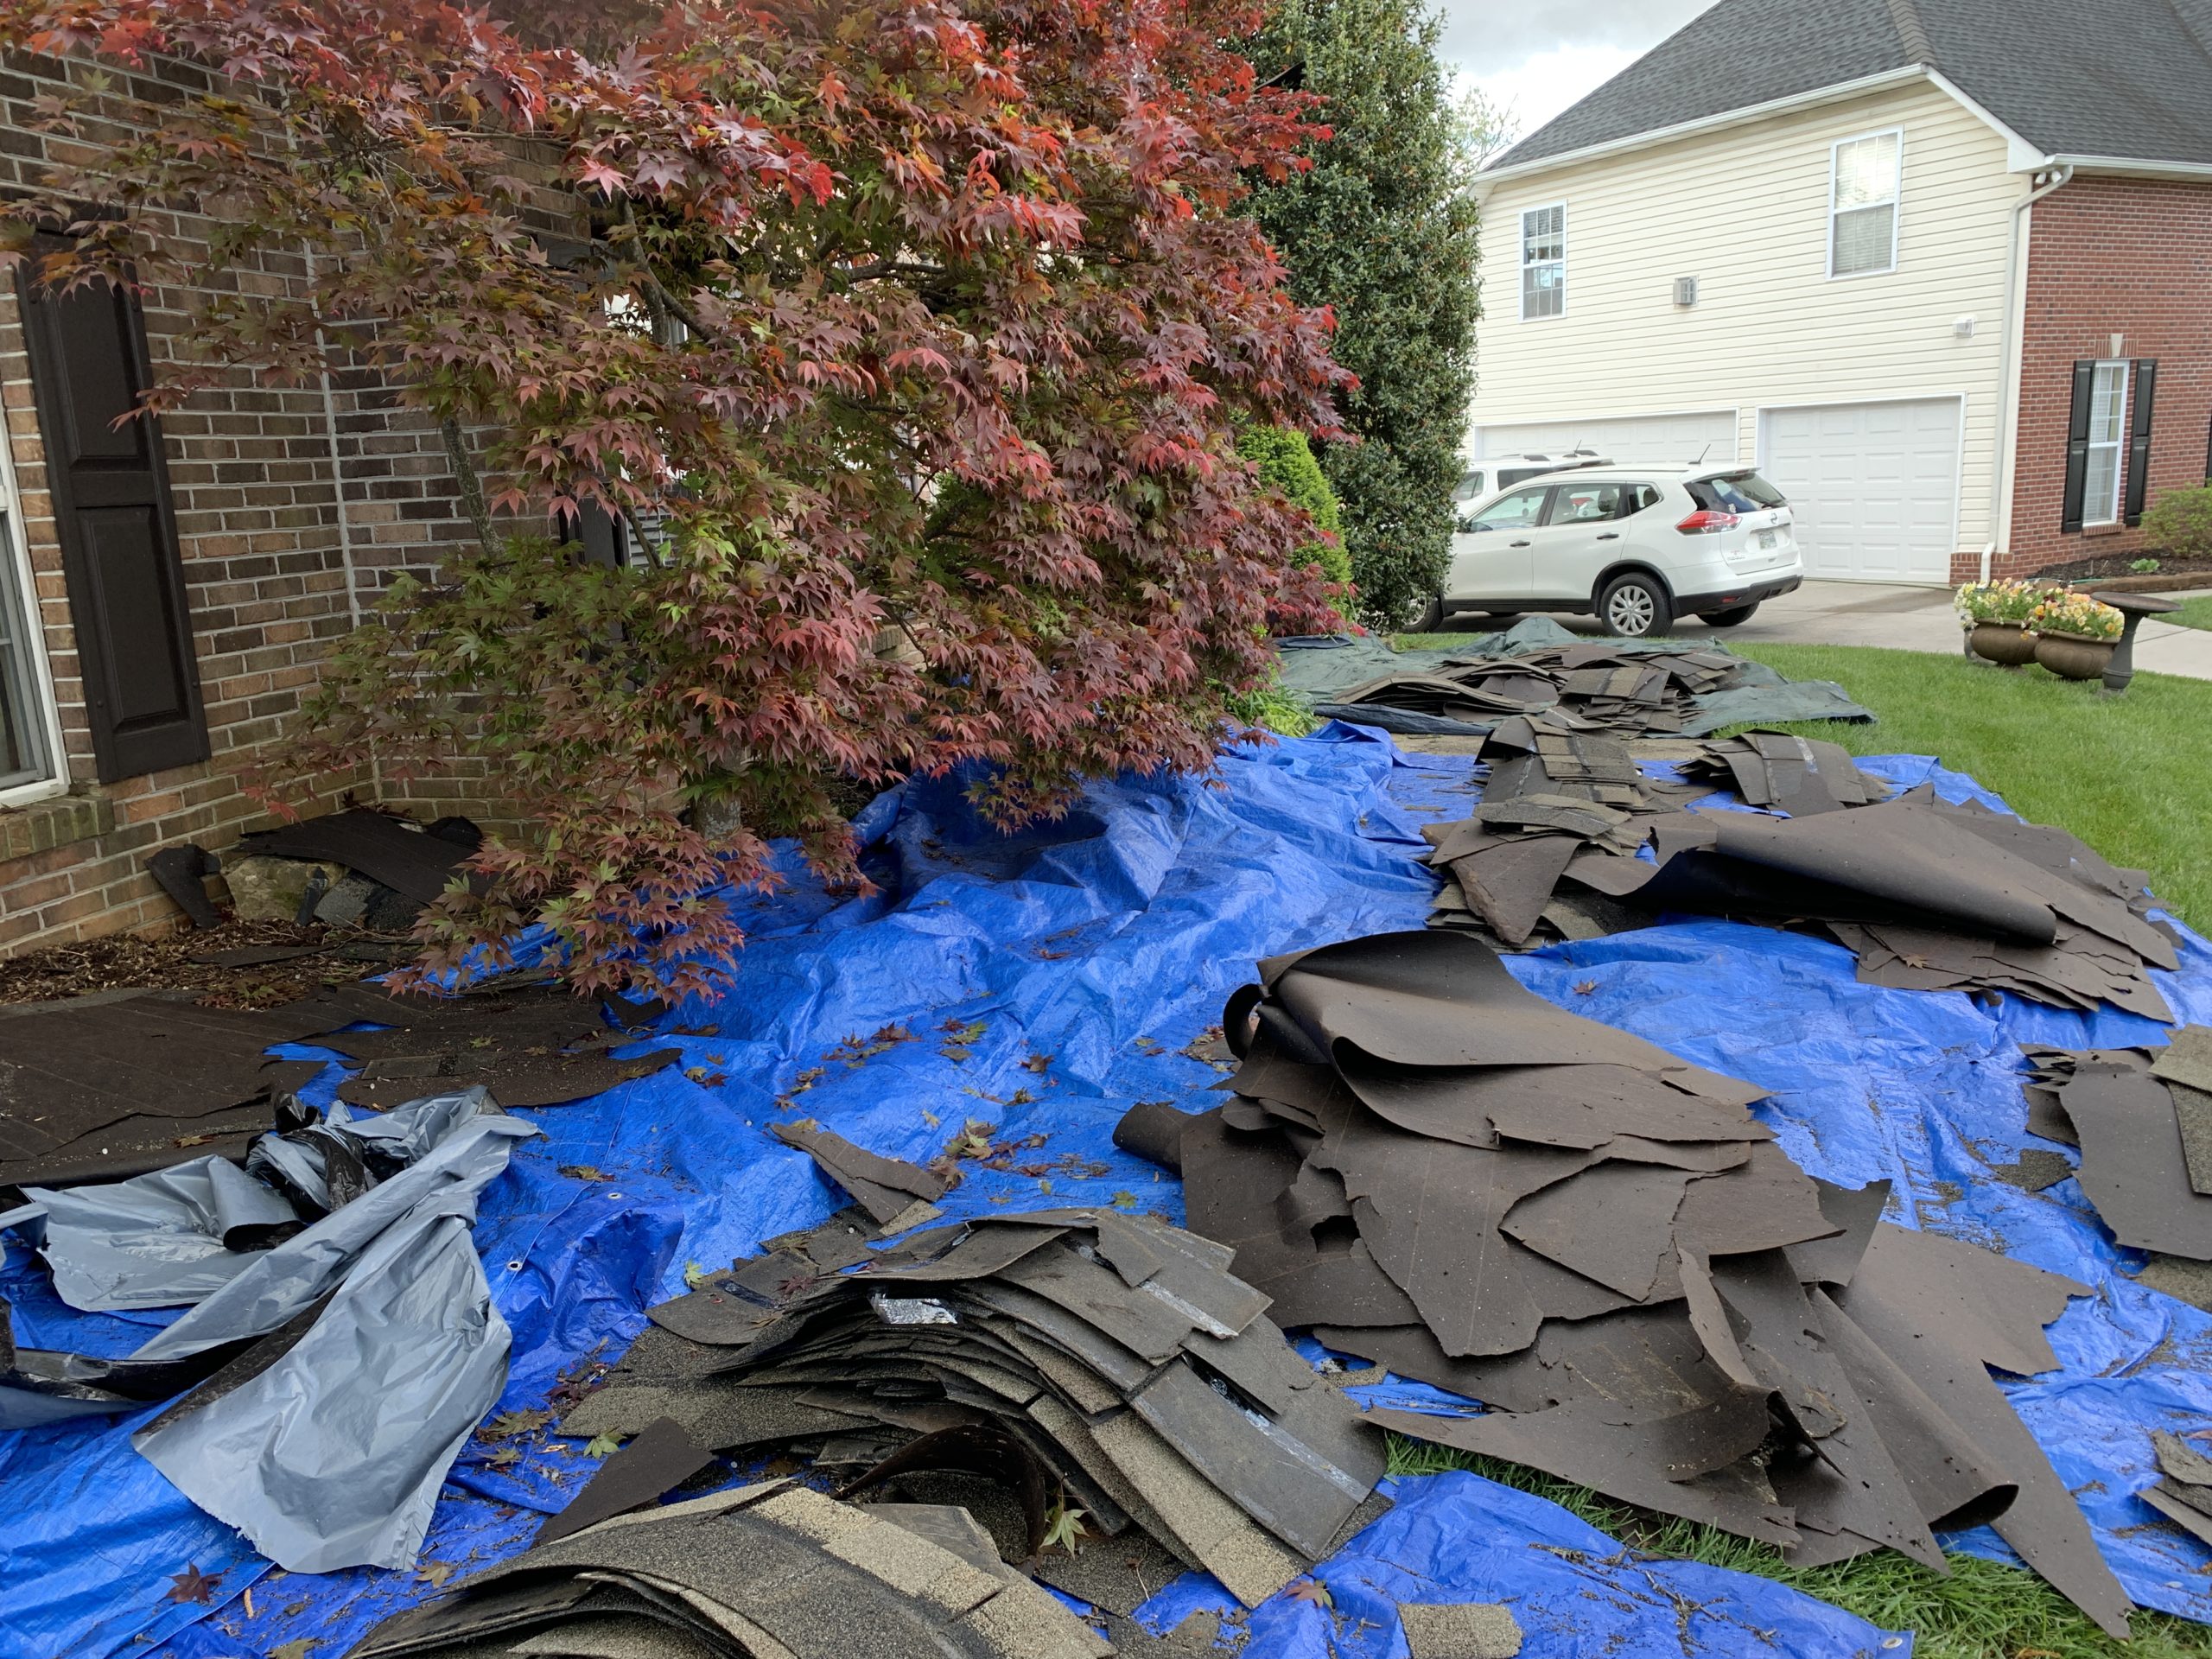 This is a view of blue tarps on the ground with old shingles that have been removed from the roof. 